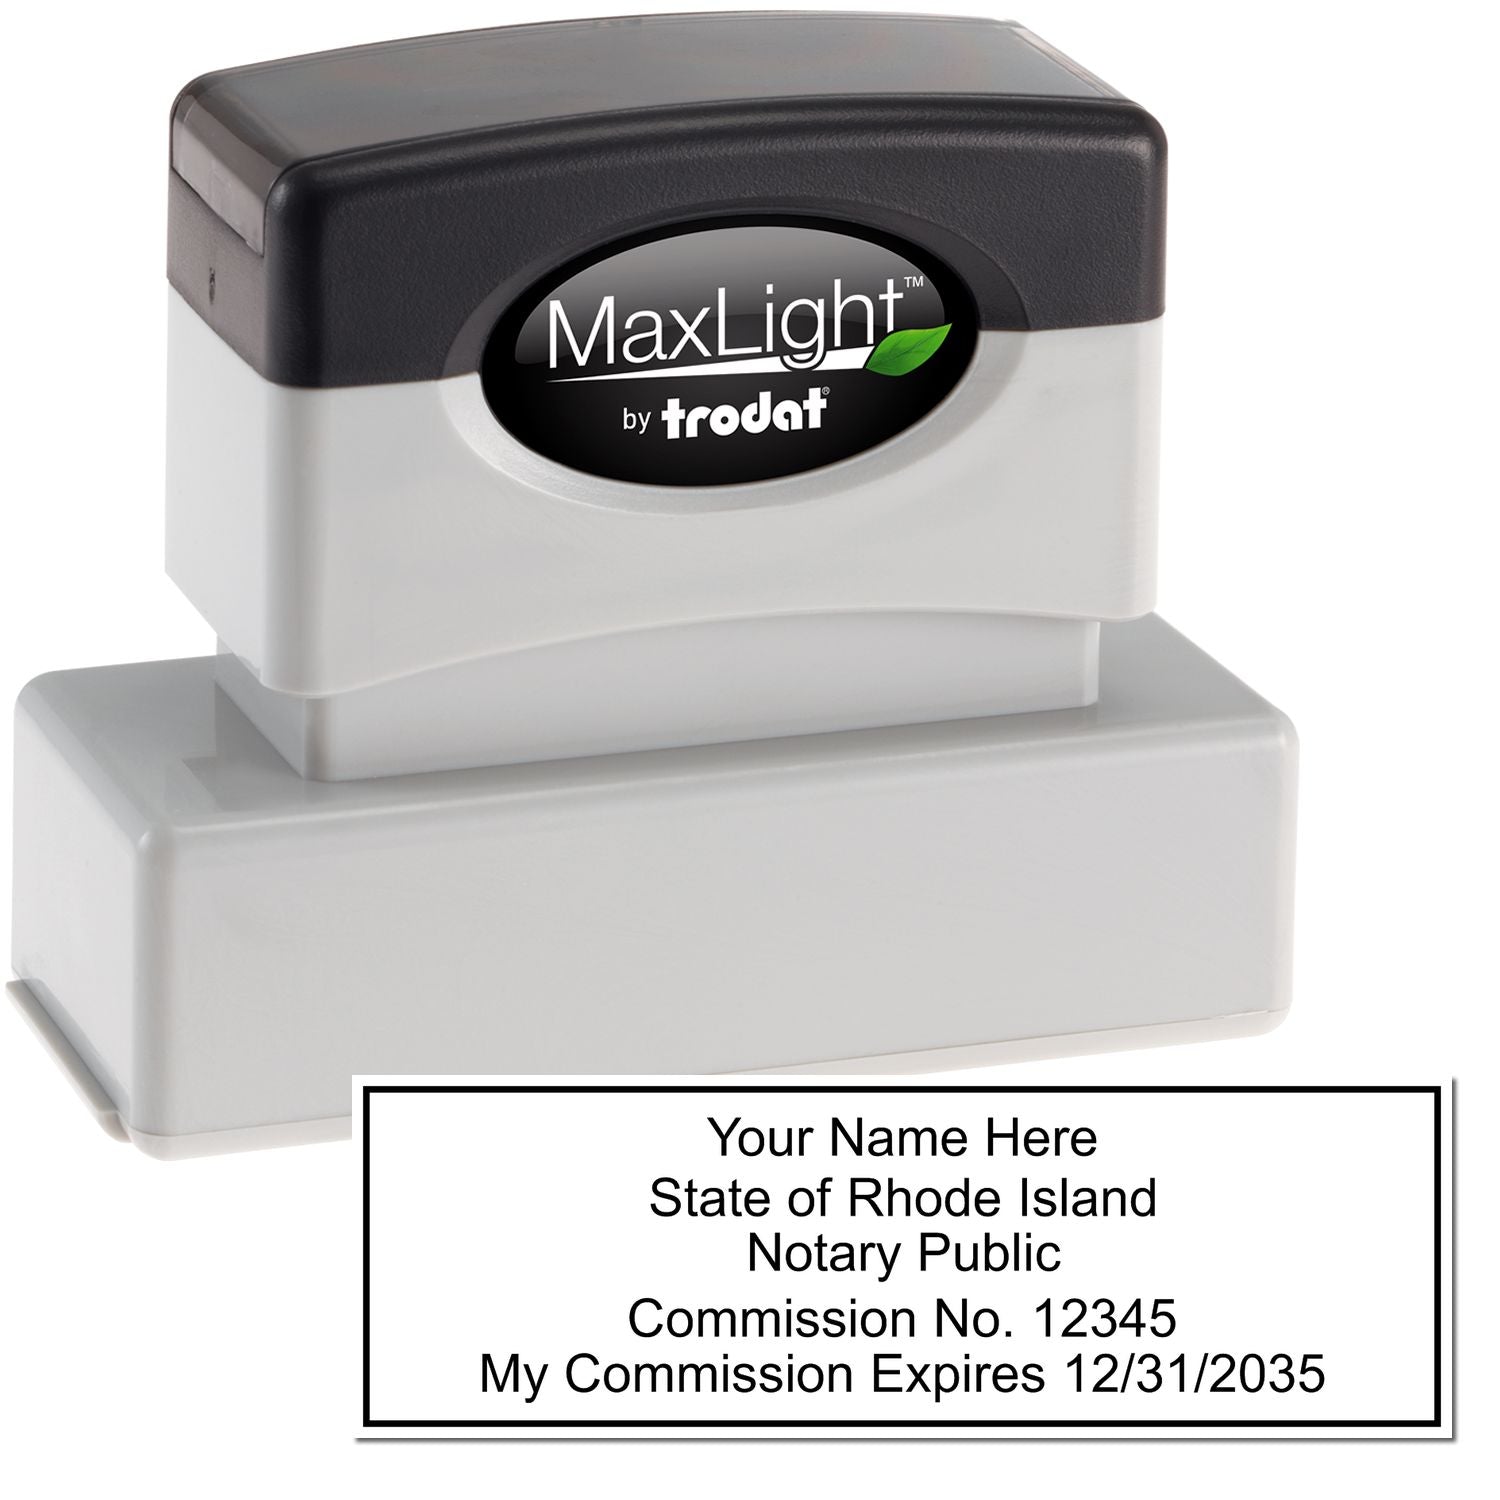 The main image for the MaxLight Premium Pre-Inked Rhode Island Rectangular Notarial Stamp depicting a sample of the imprint and electronic files